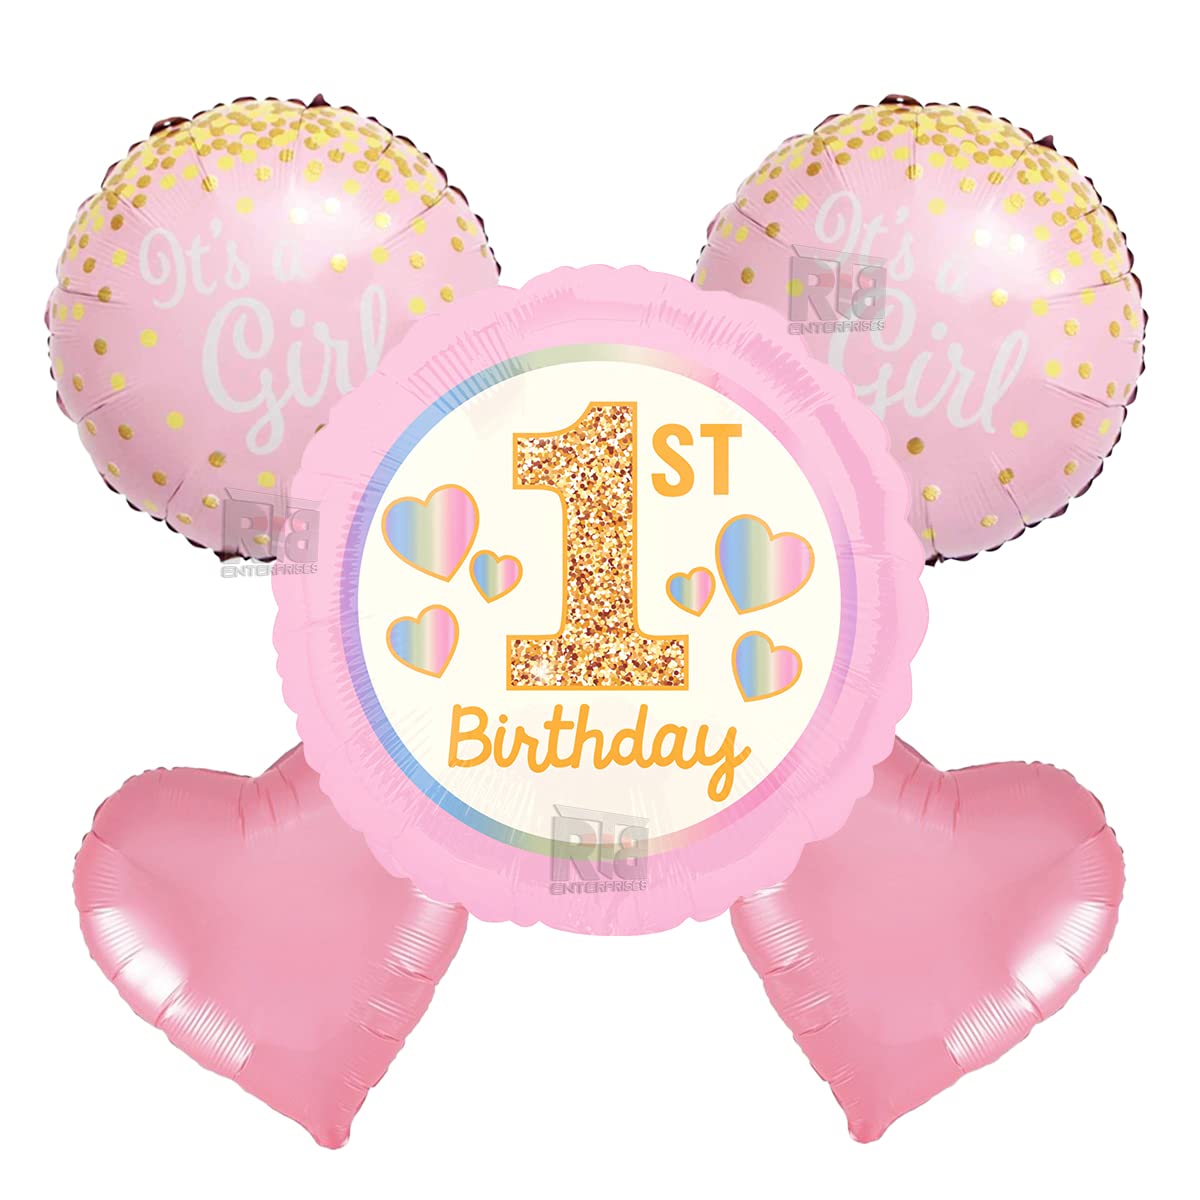 BLODLE 5pcs 1st Birthday Pink Balloons/ Baby Girl Arrival Pink Balloon / Birthday Party, Party Decoration, Kids Birthday Decoration, Celebration - Pack of 1